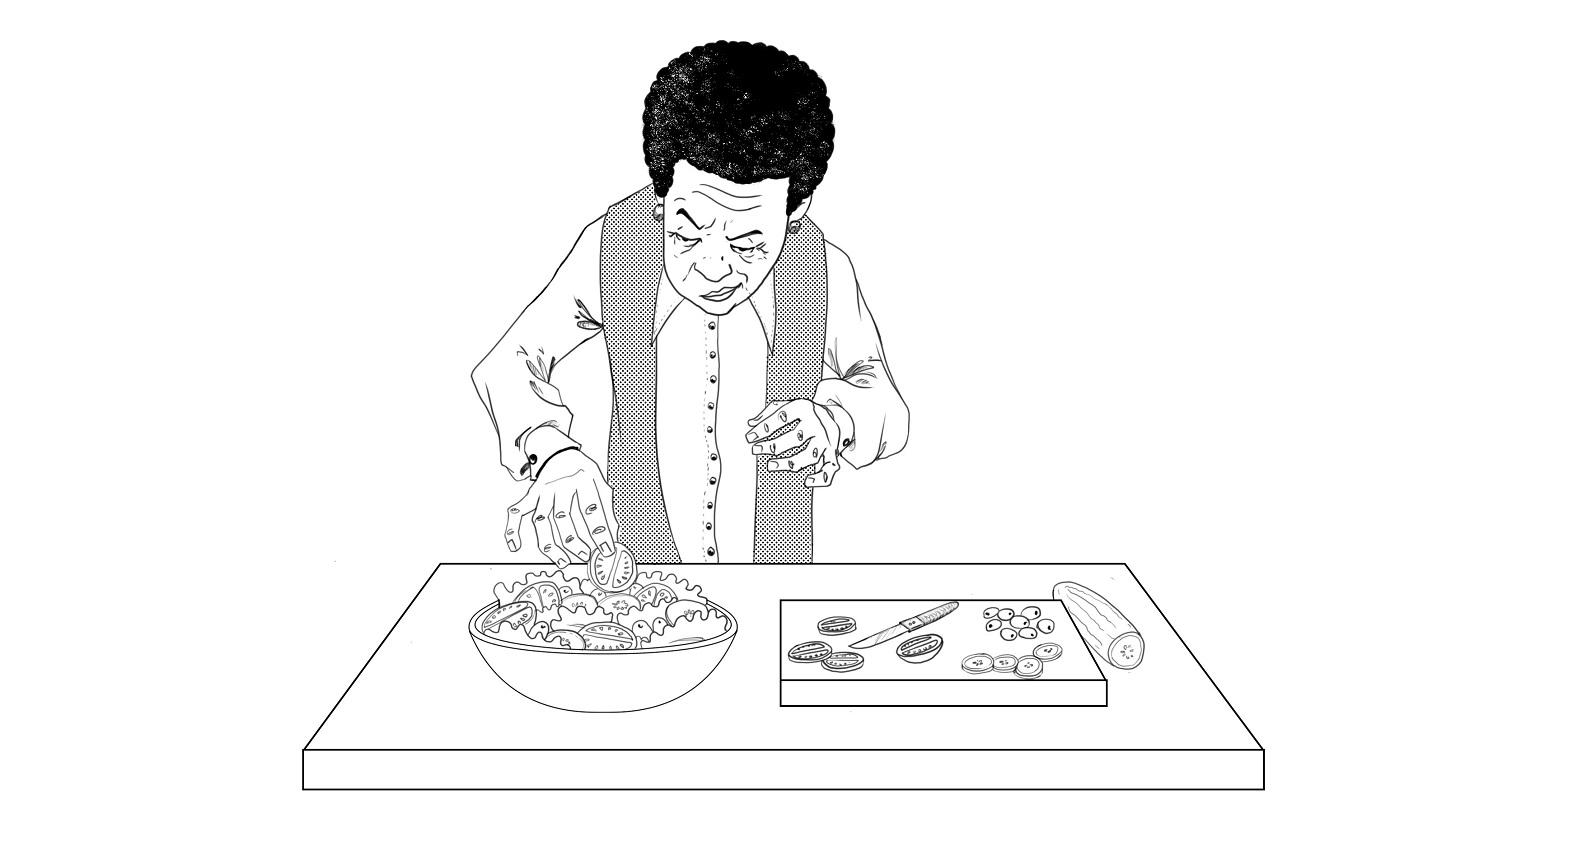 Mom cooking illustration by Michael Powell